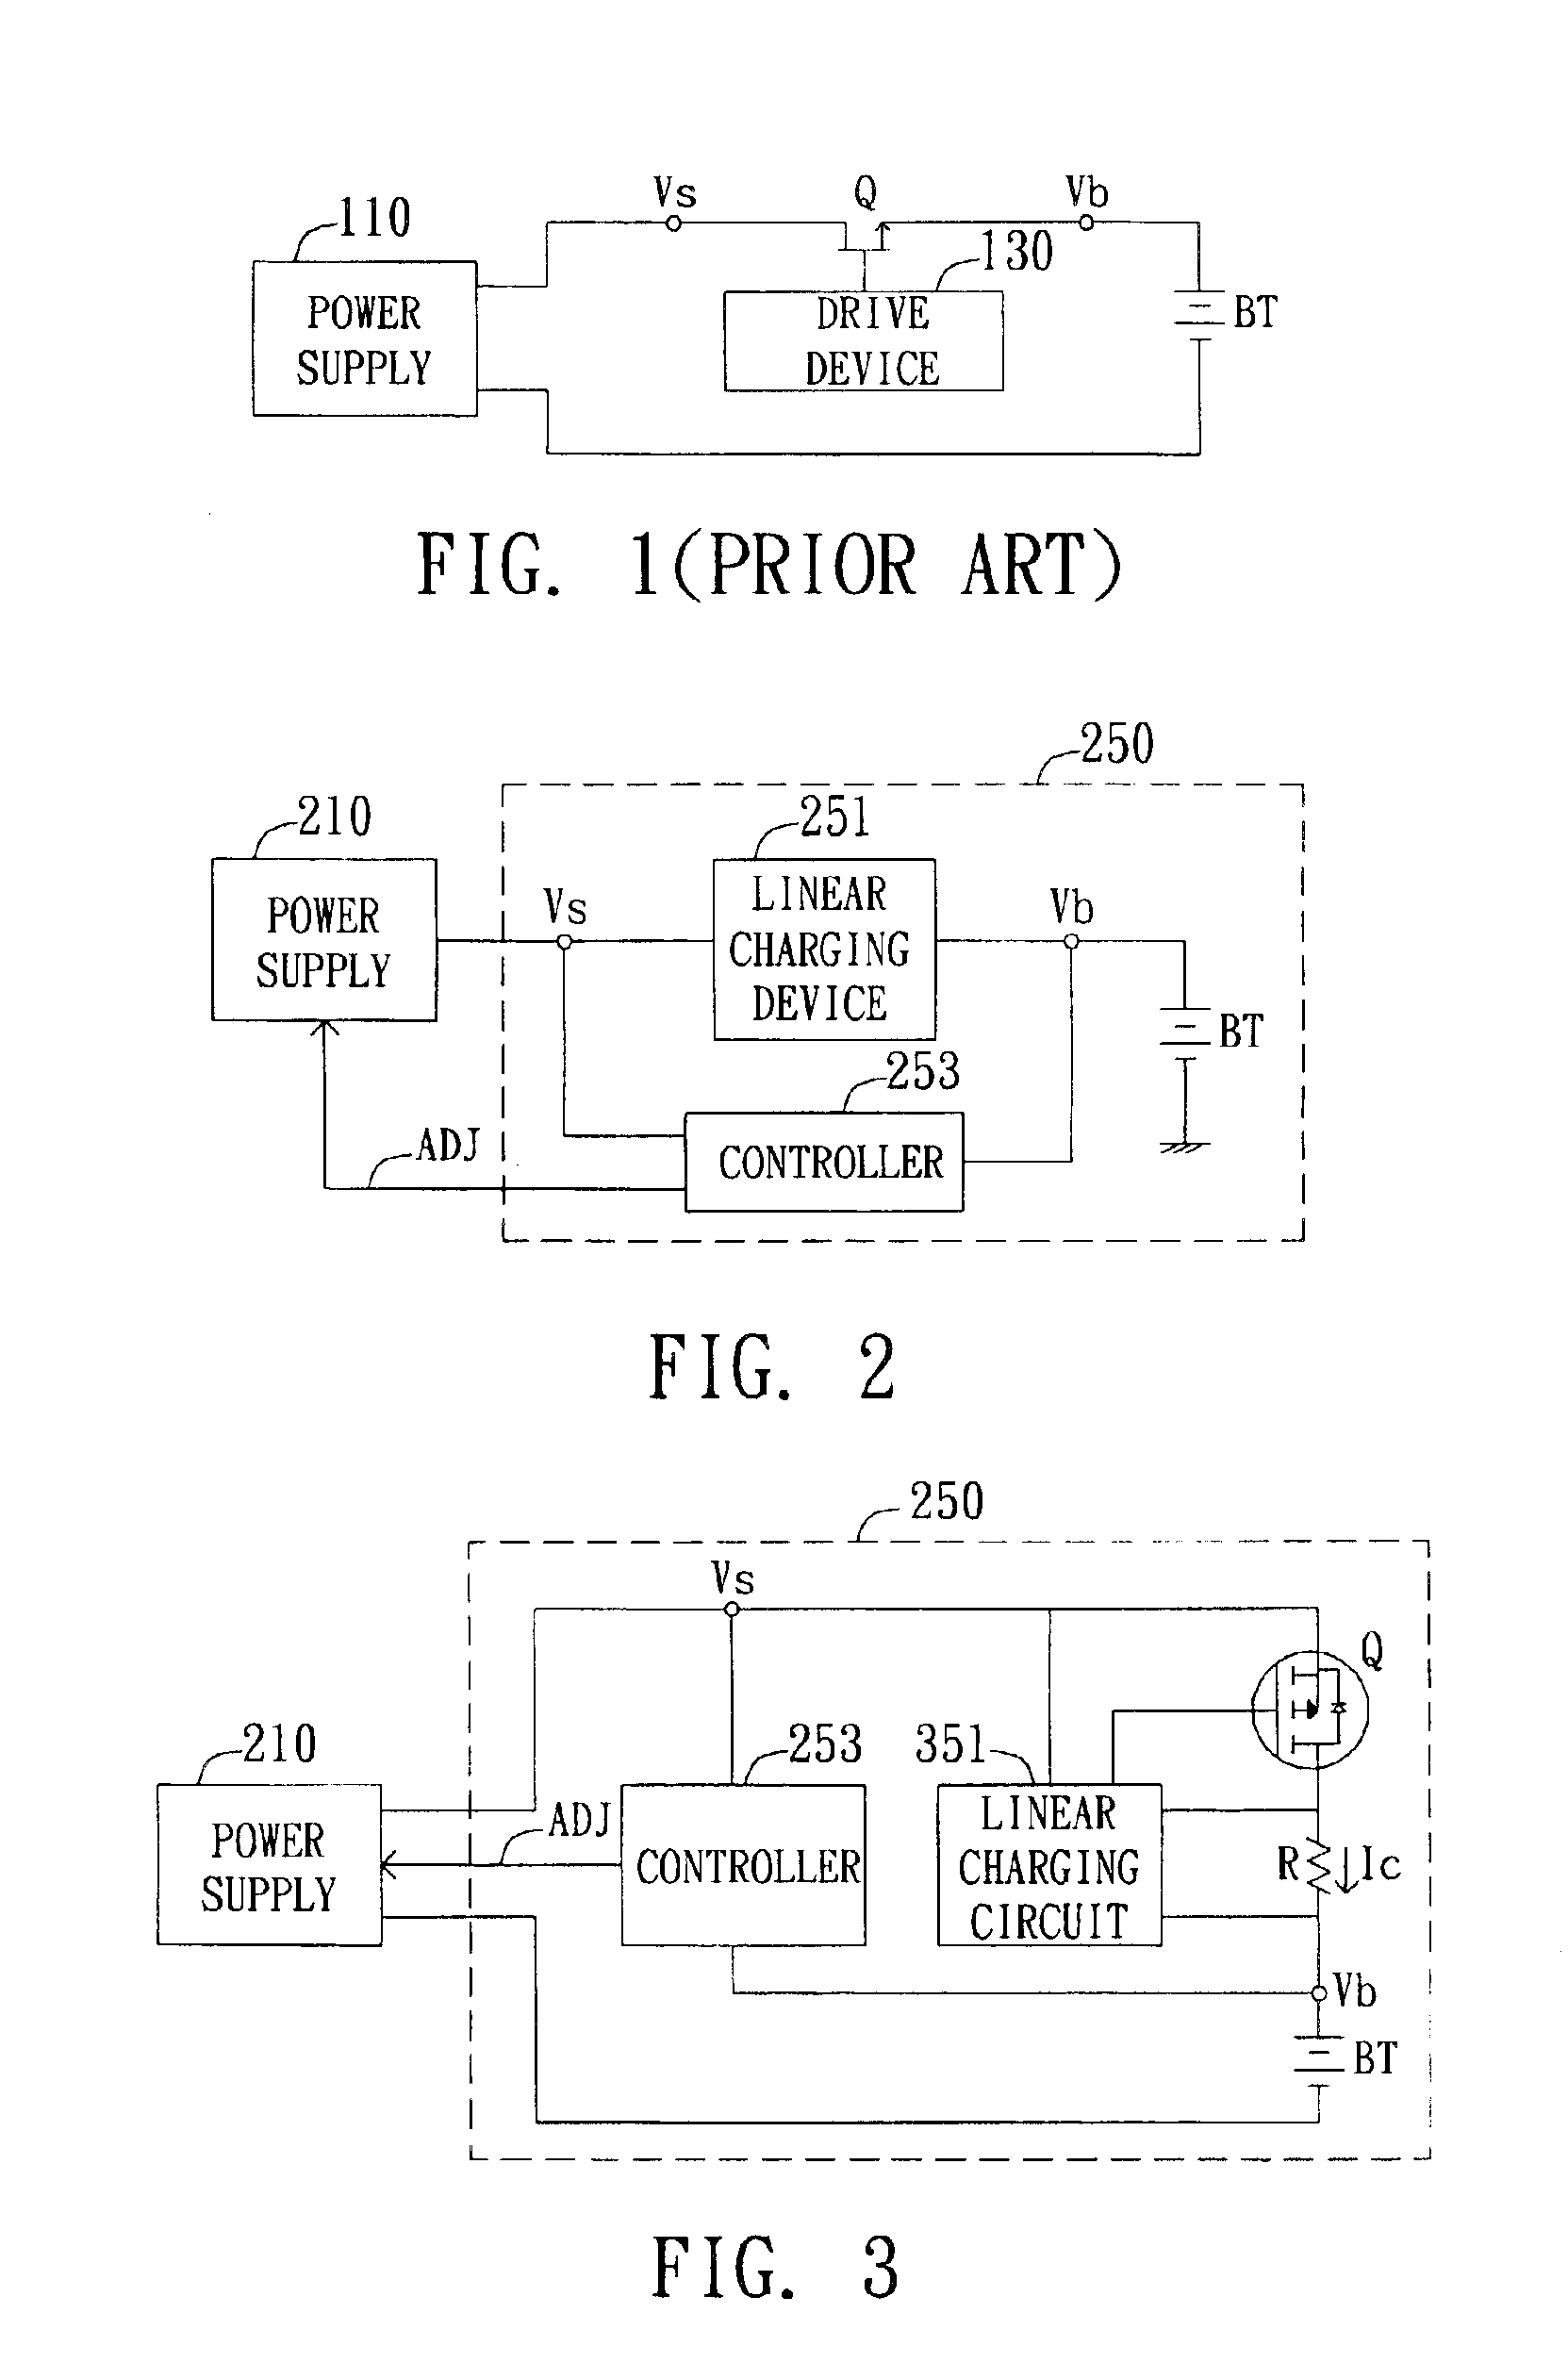 Two-stage charging device